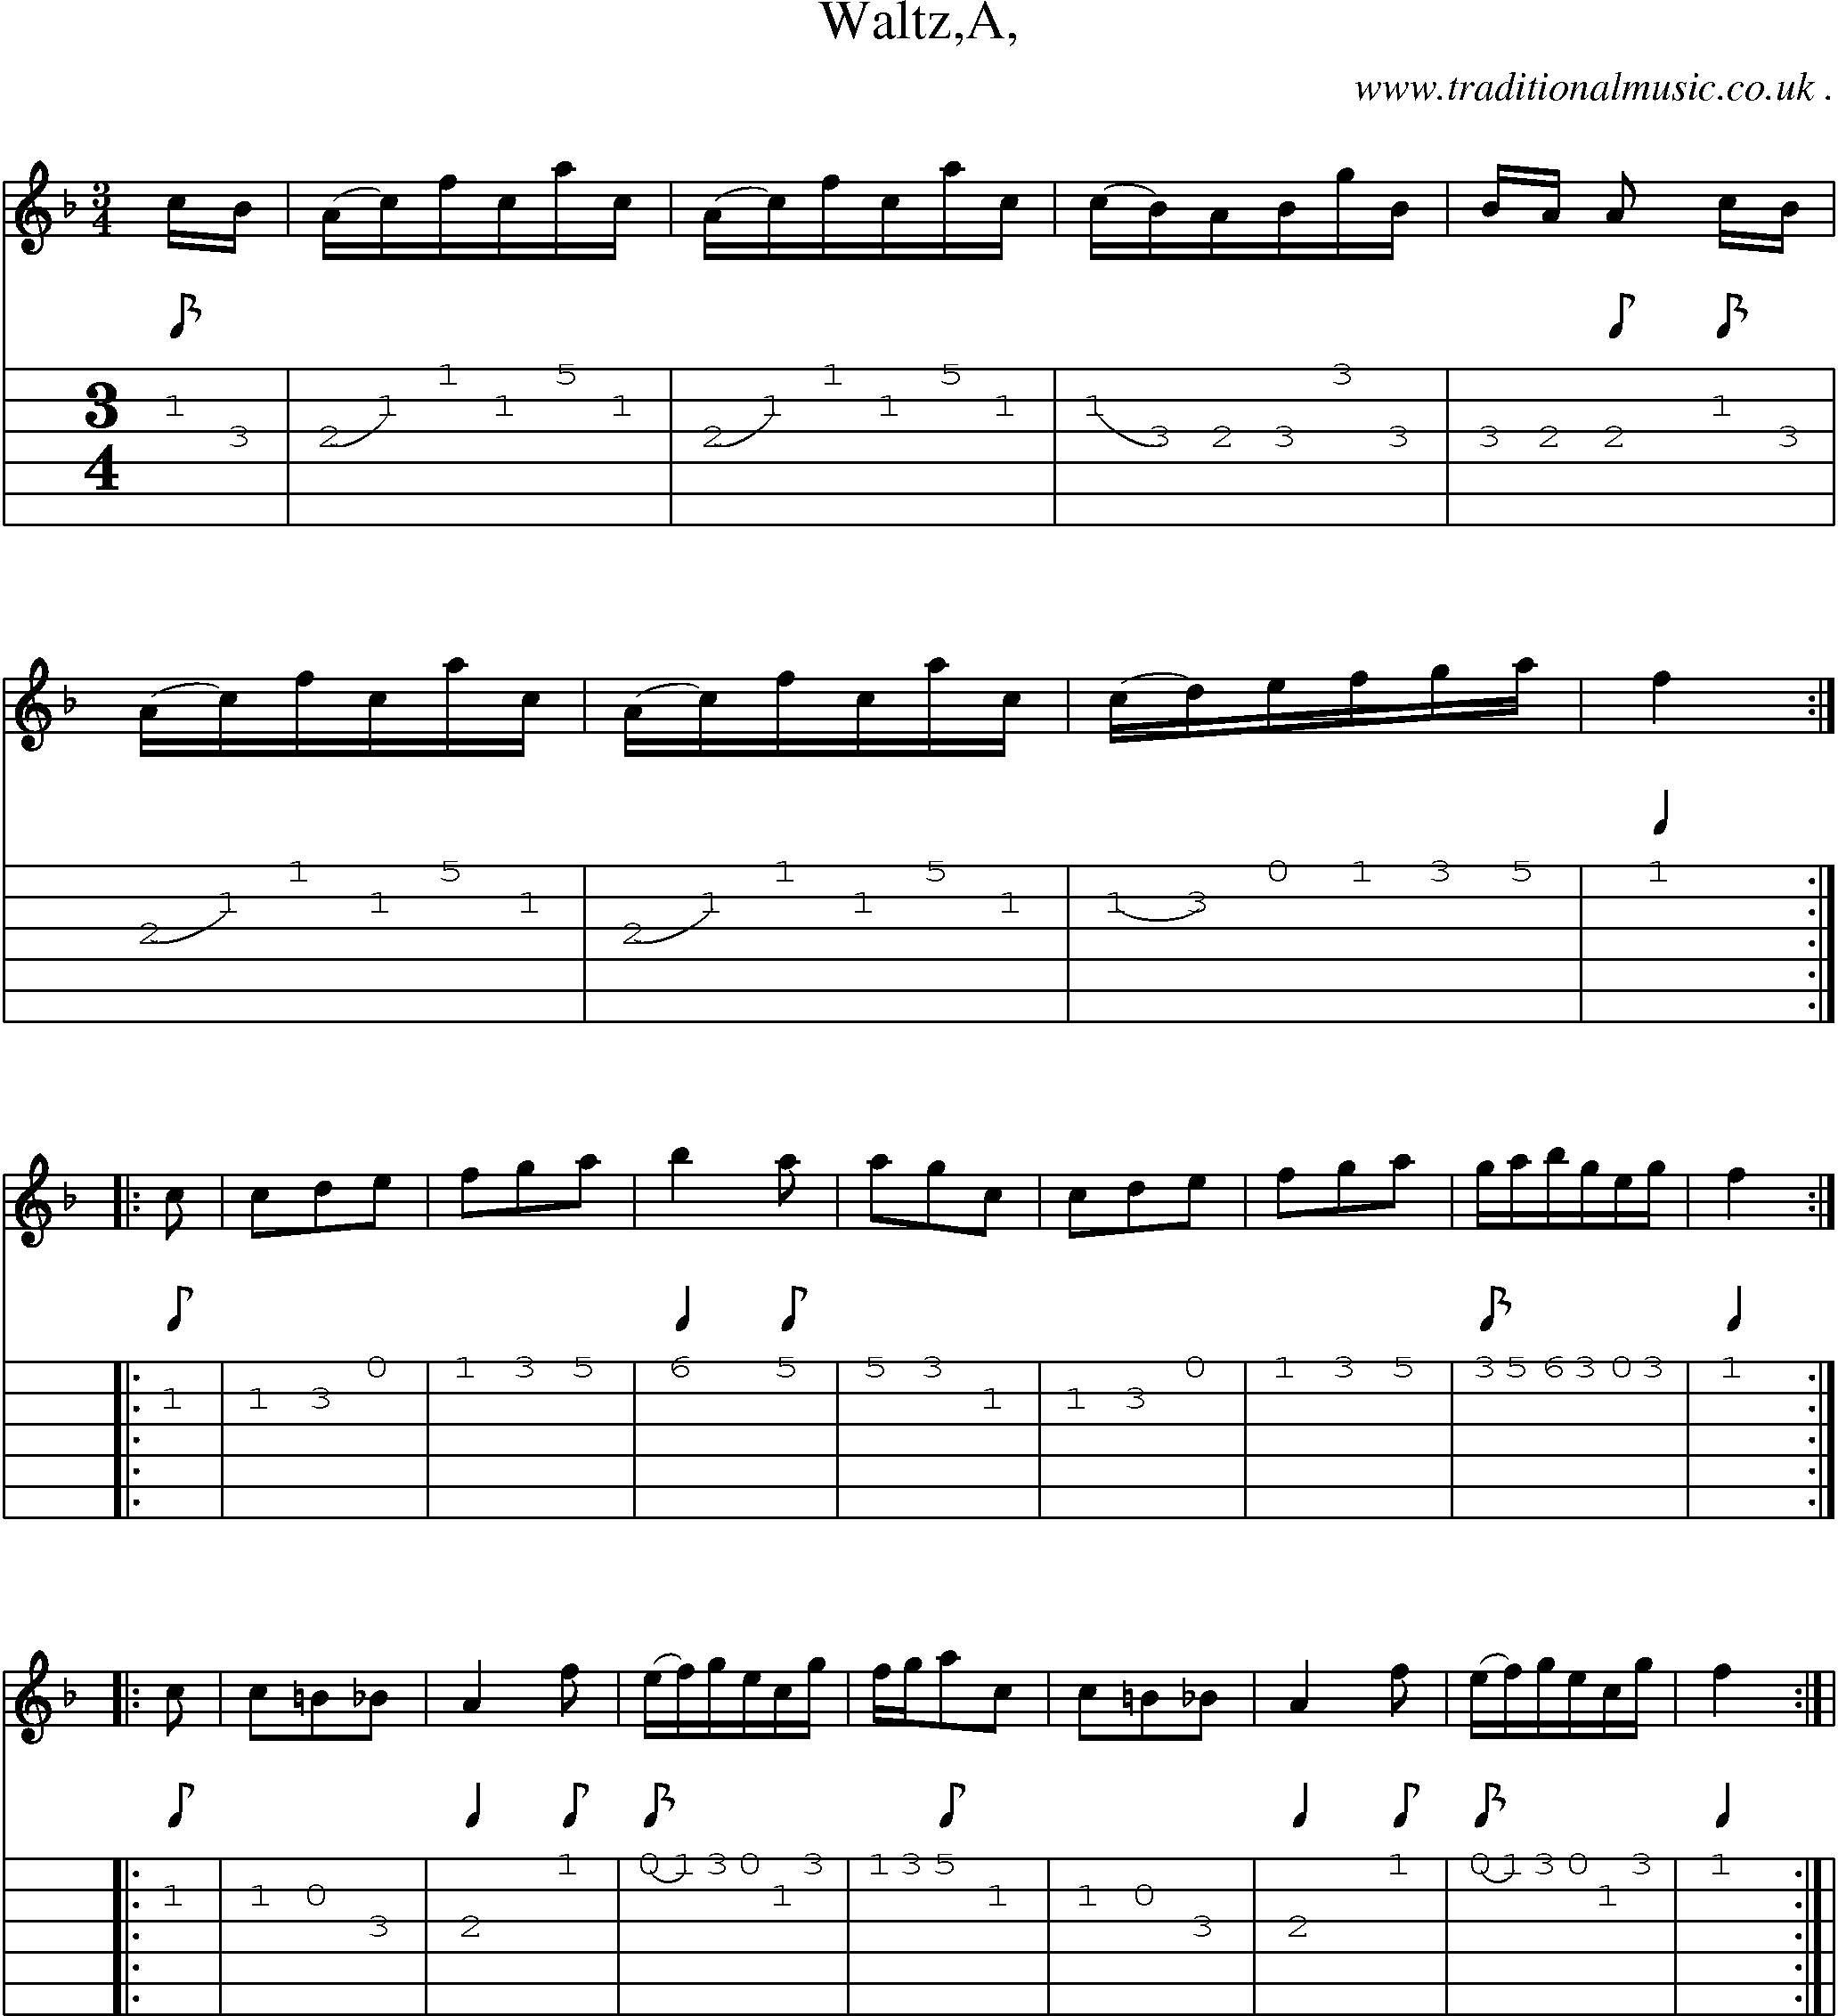 Sheet-Music and Guitar Tabs for WaltzA 